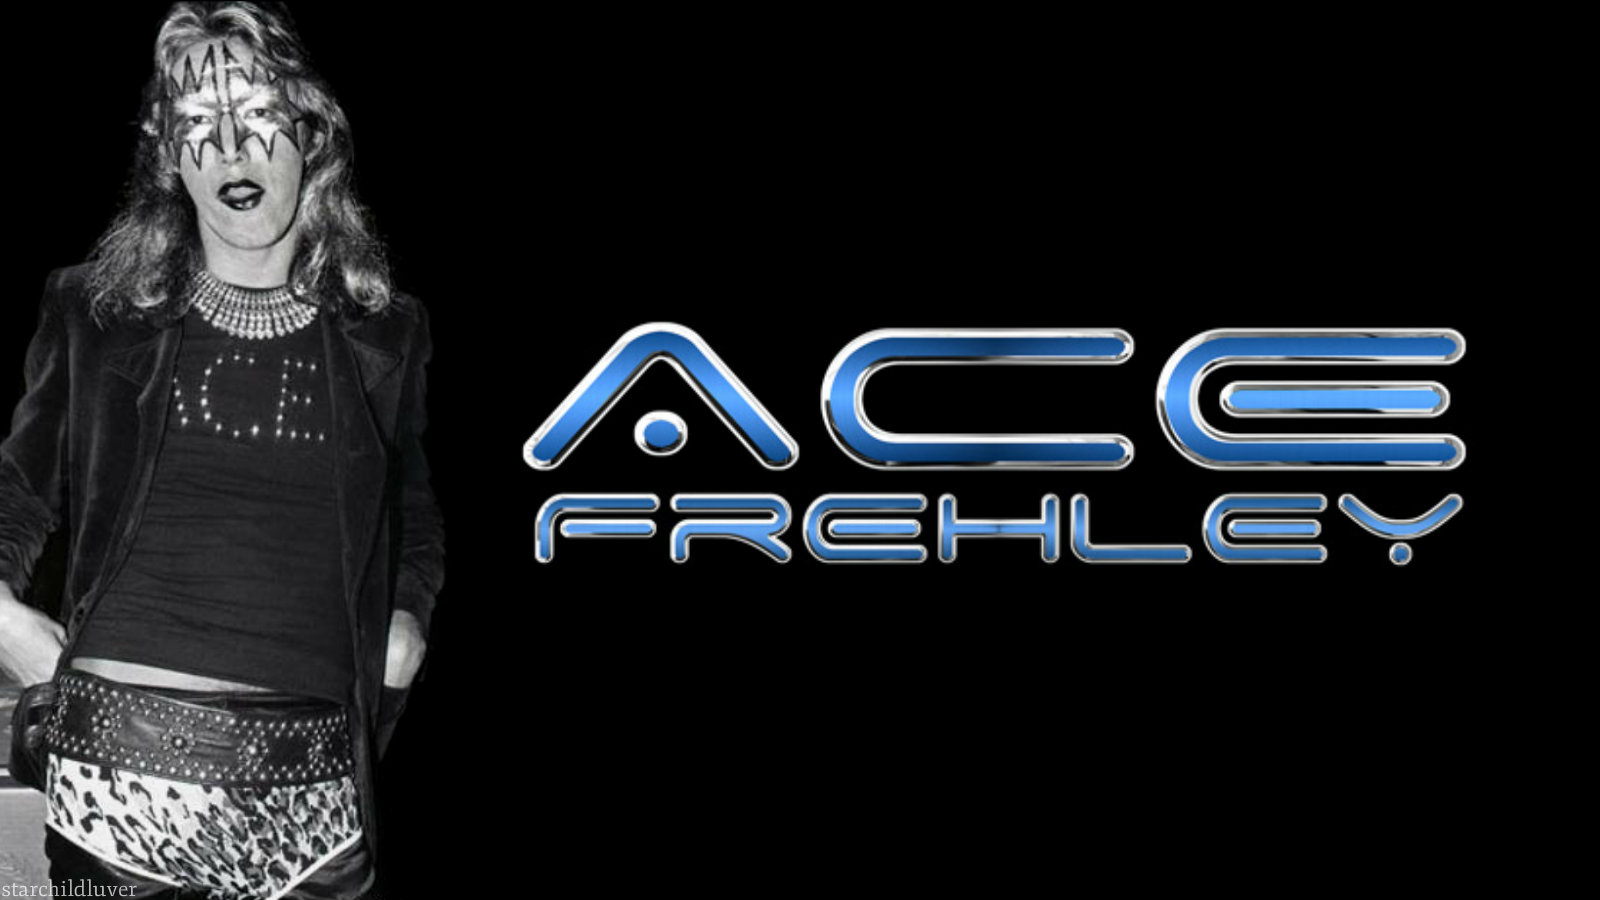 Free download Ace frehley KISS Wallpaper 38345820